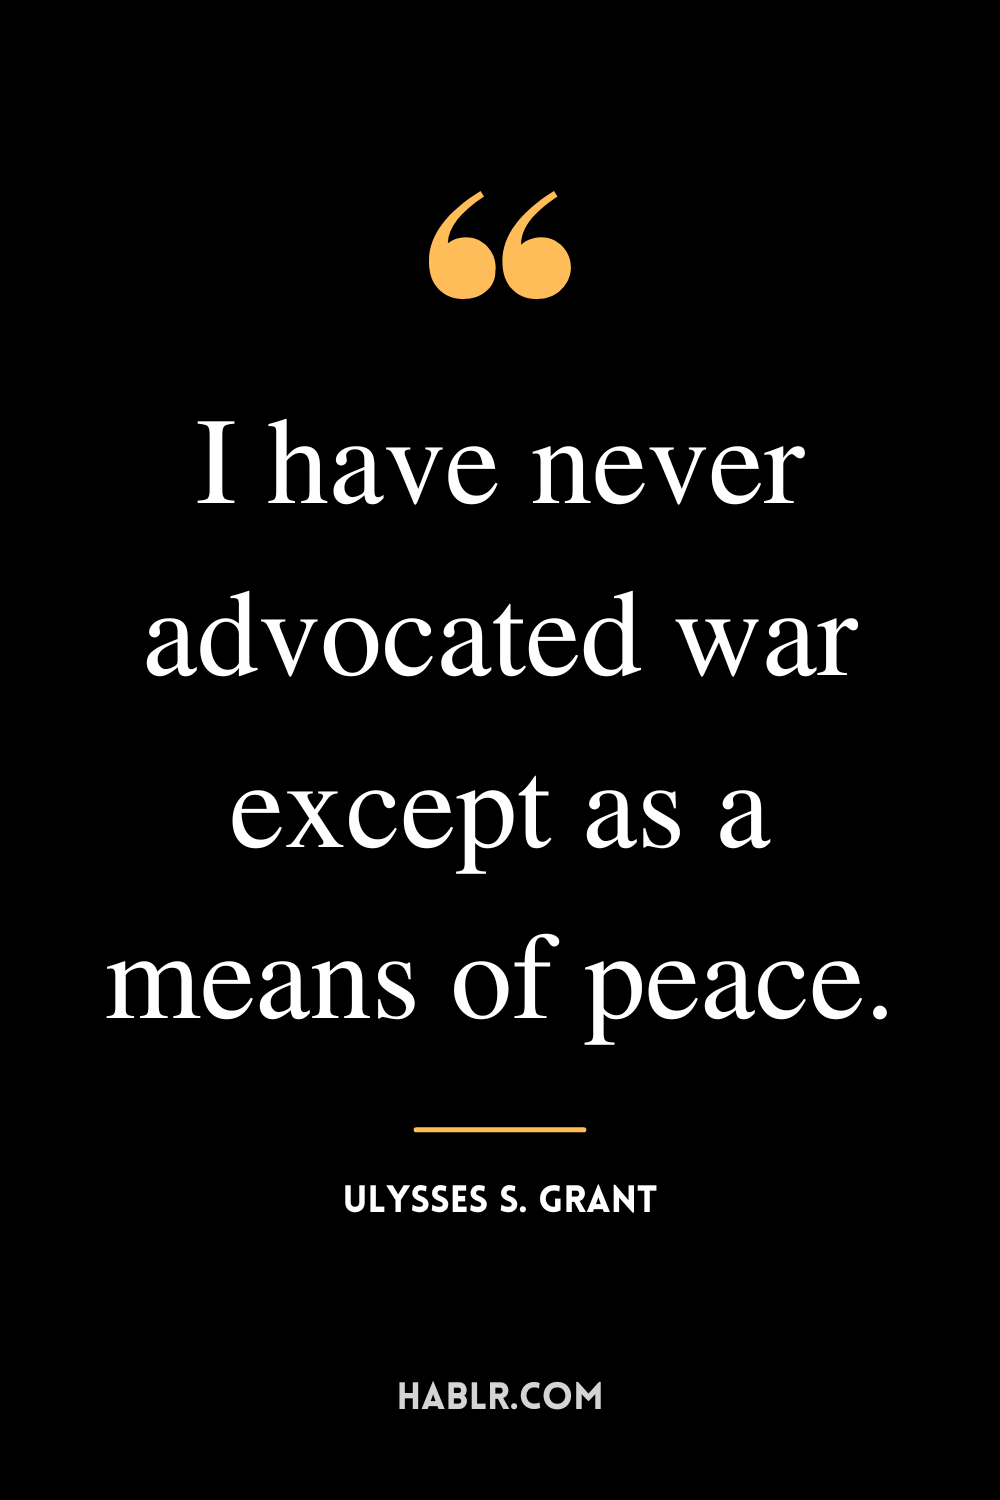 “I have never advocated war except as a means of peace.” -Ulysses S. Grant